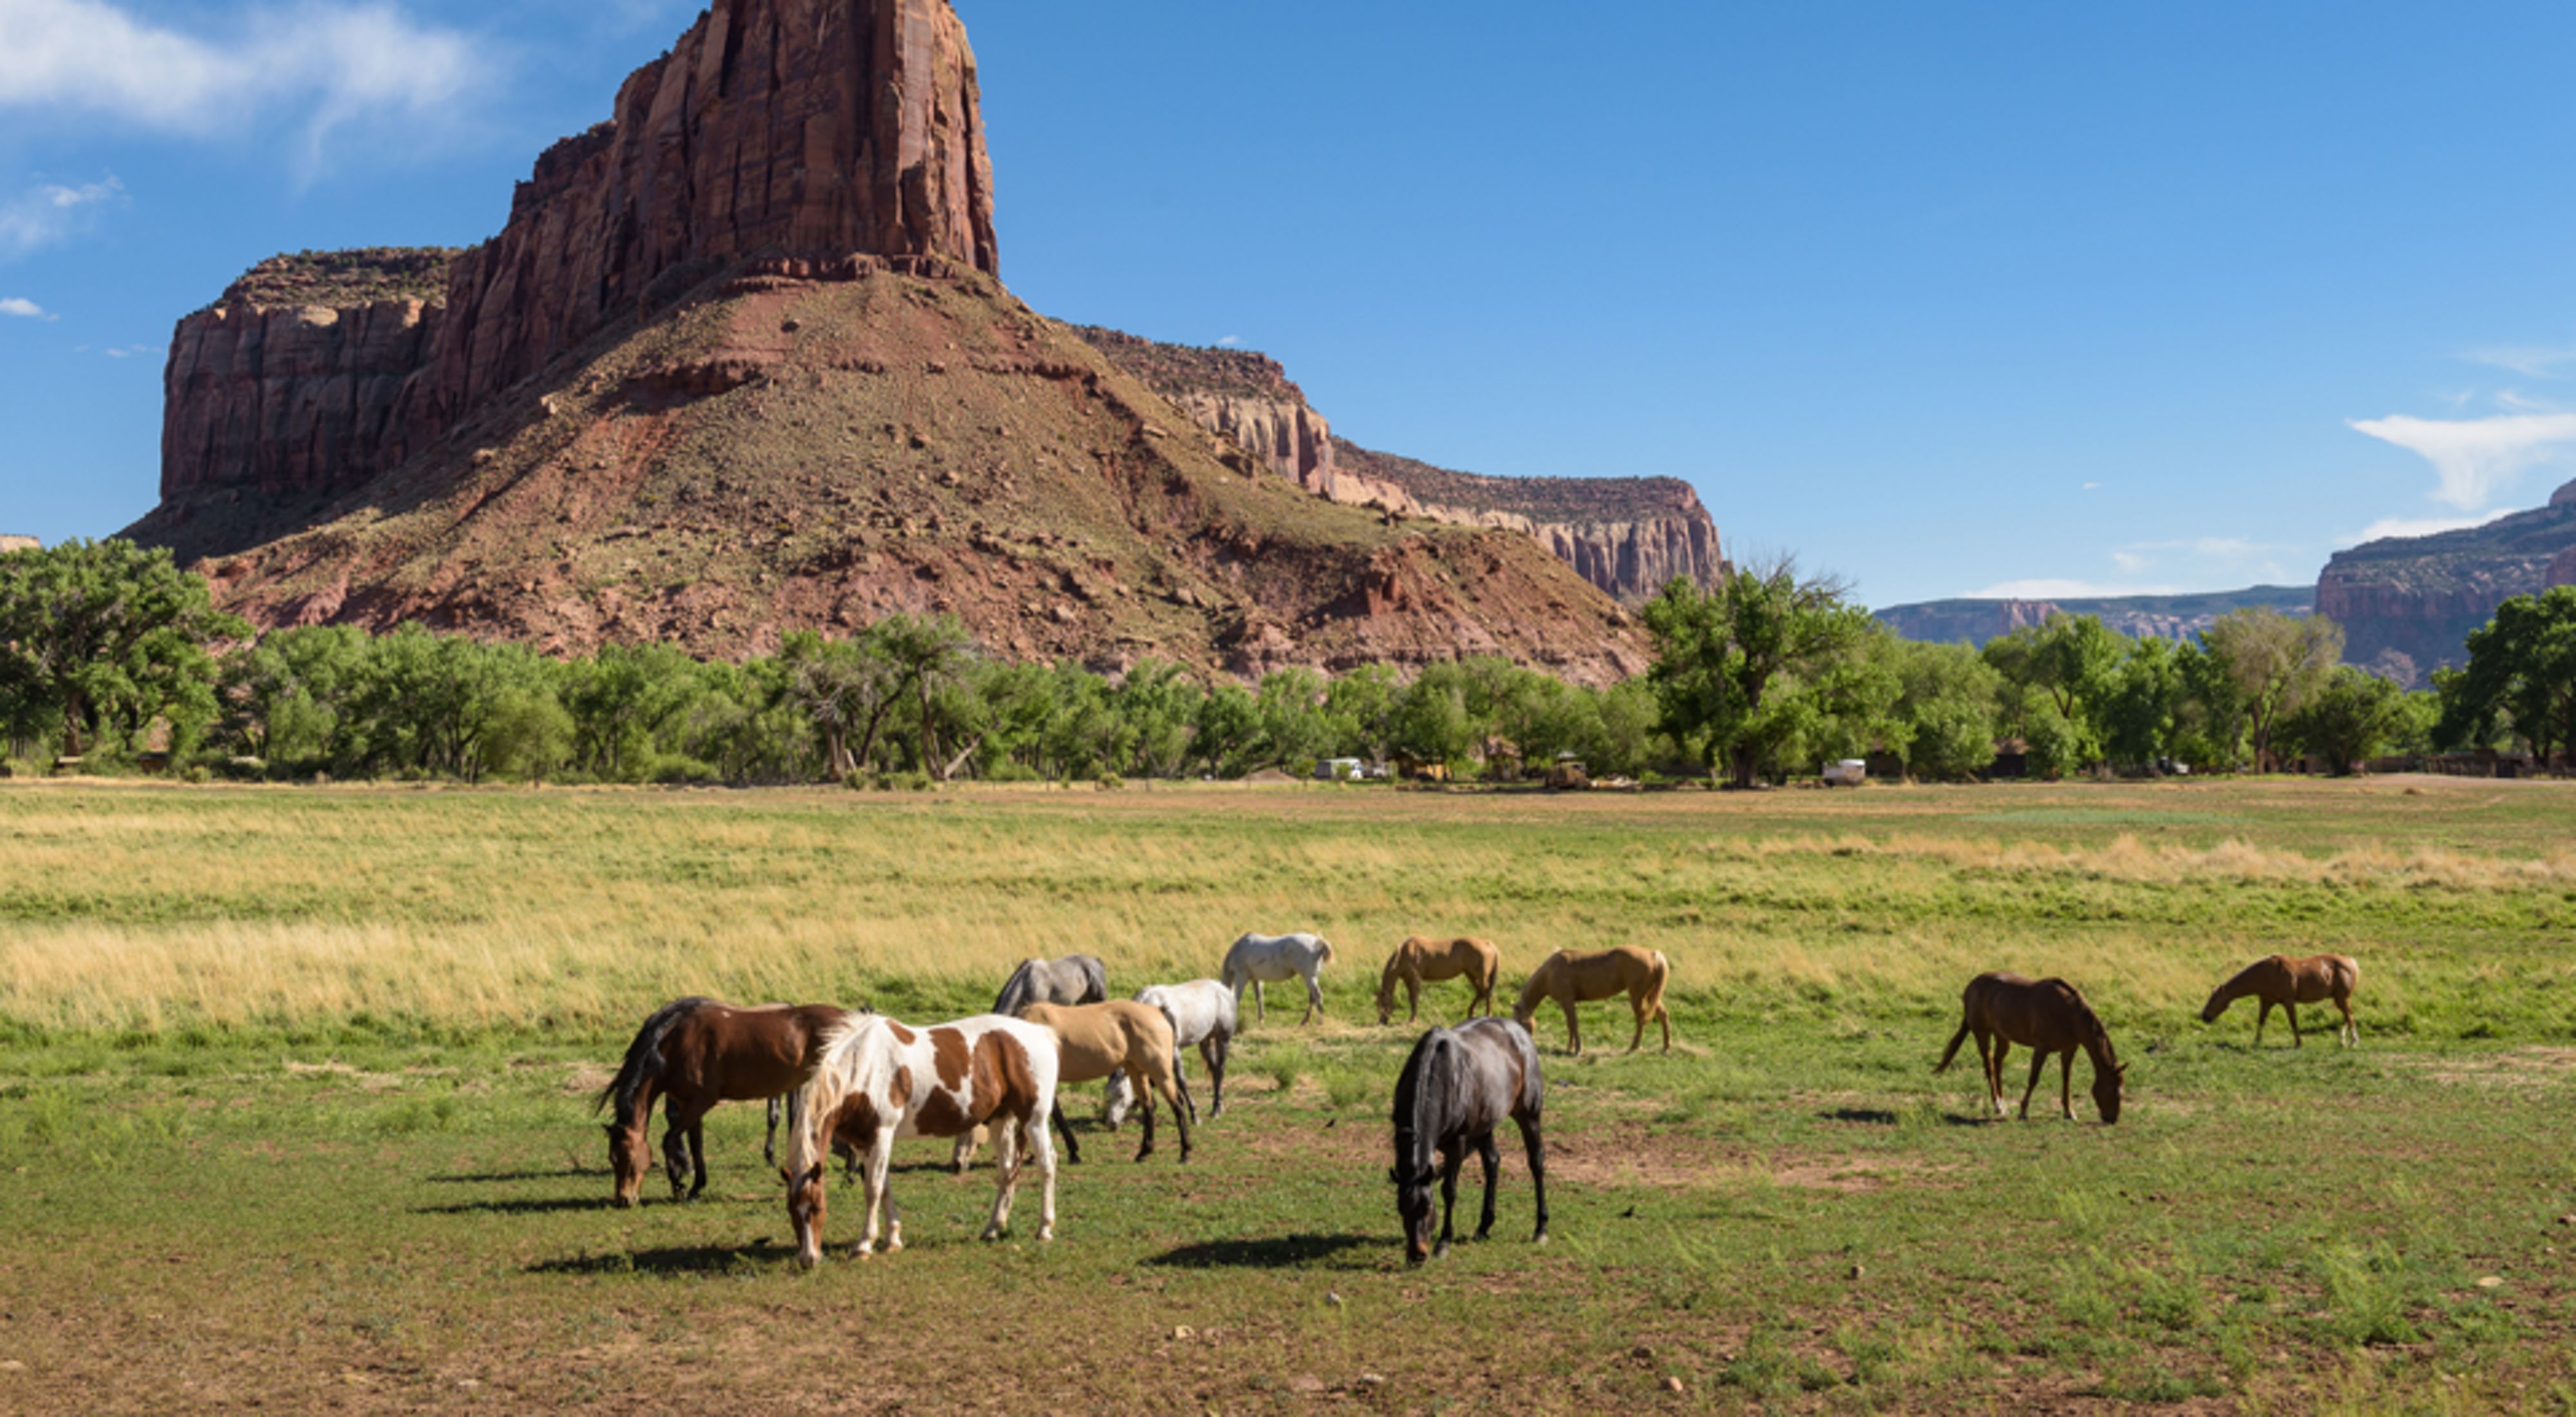 A small group of horses graze in a field of grass with a large, red stone outcropping in the distance.